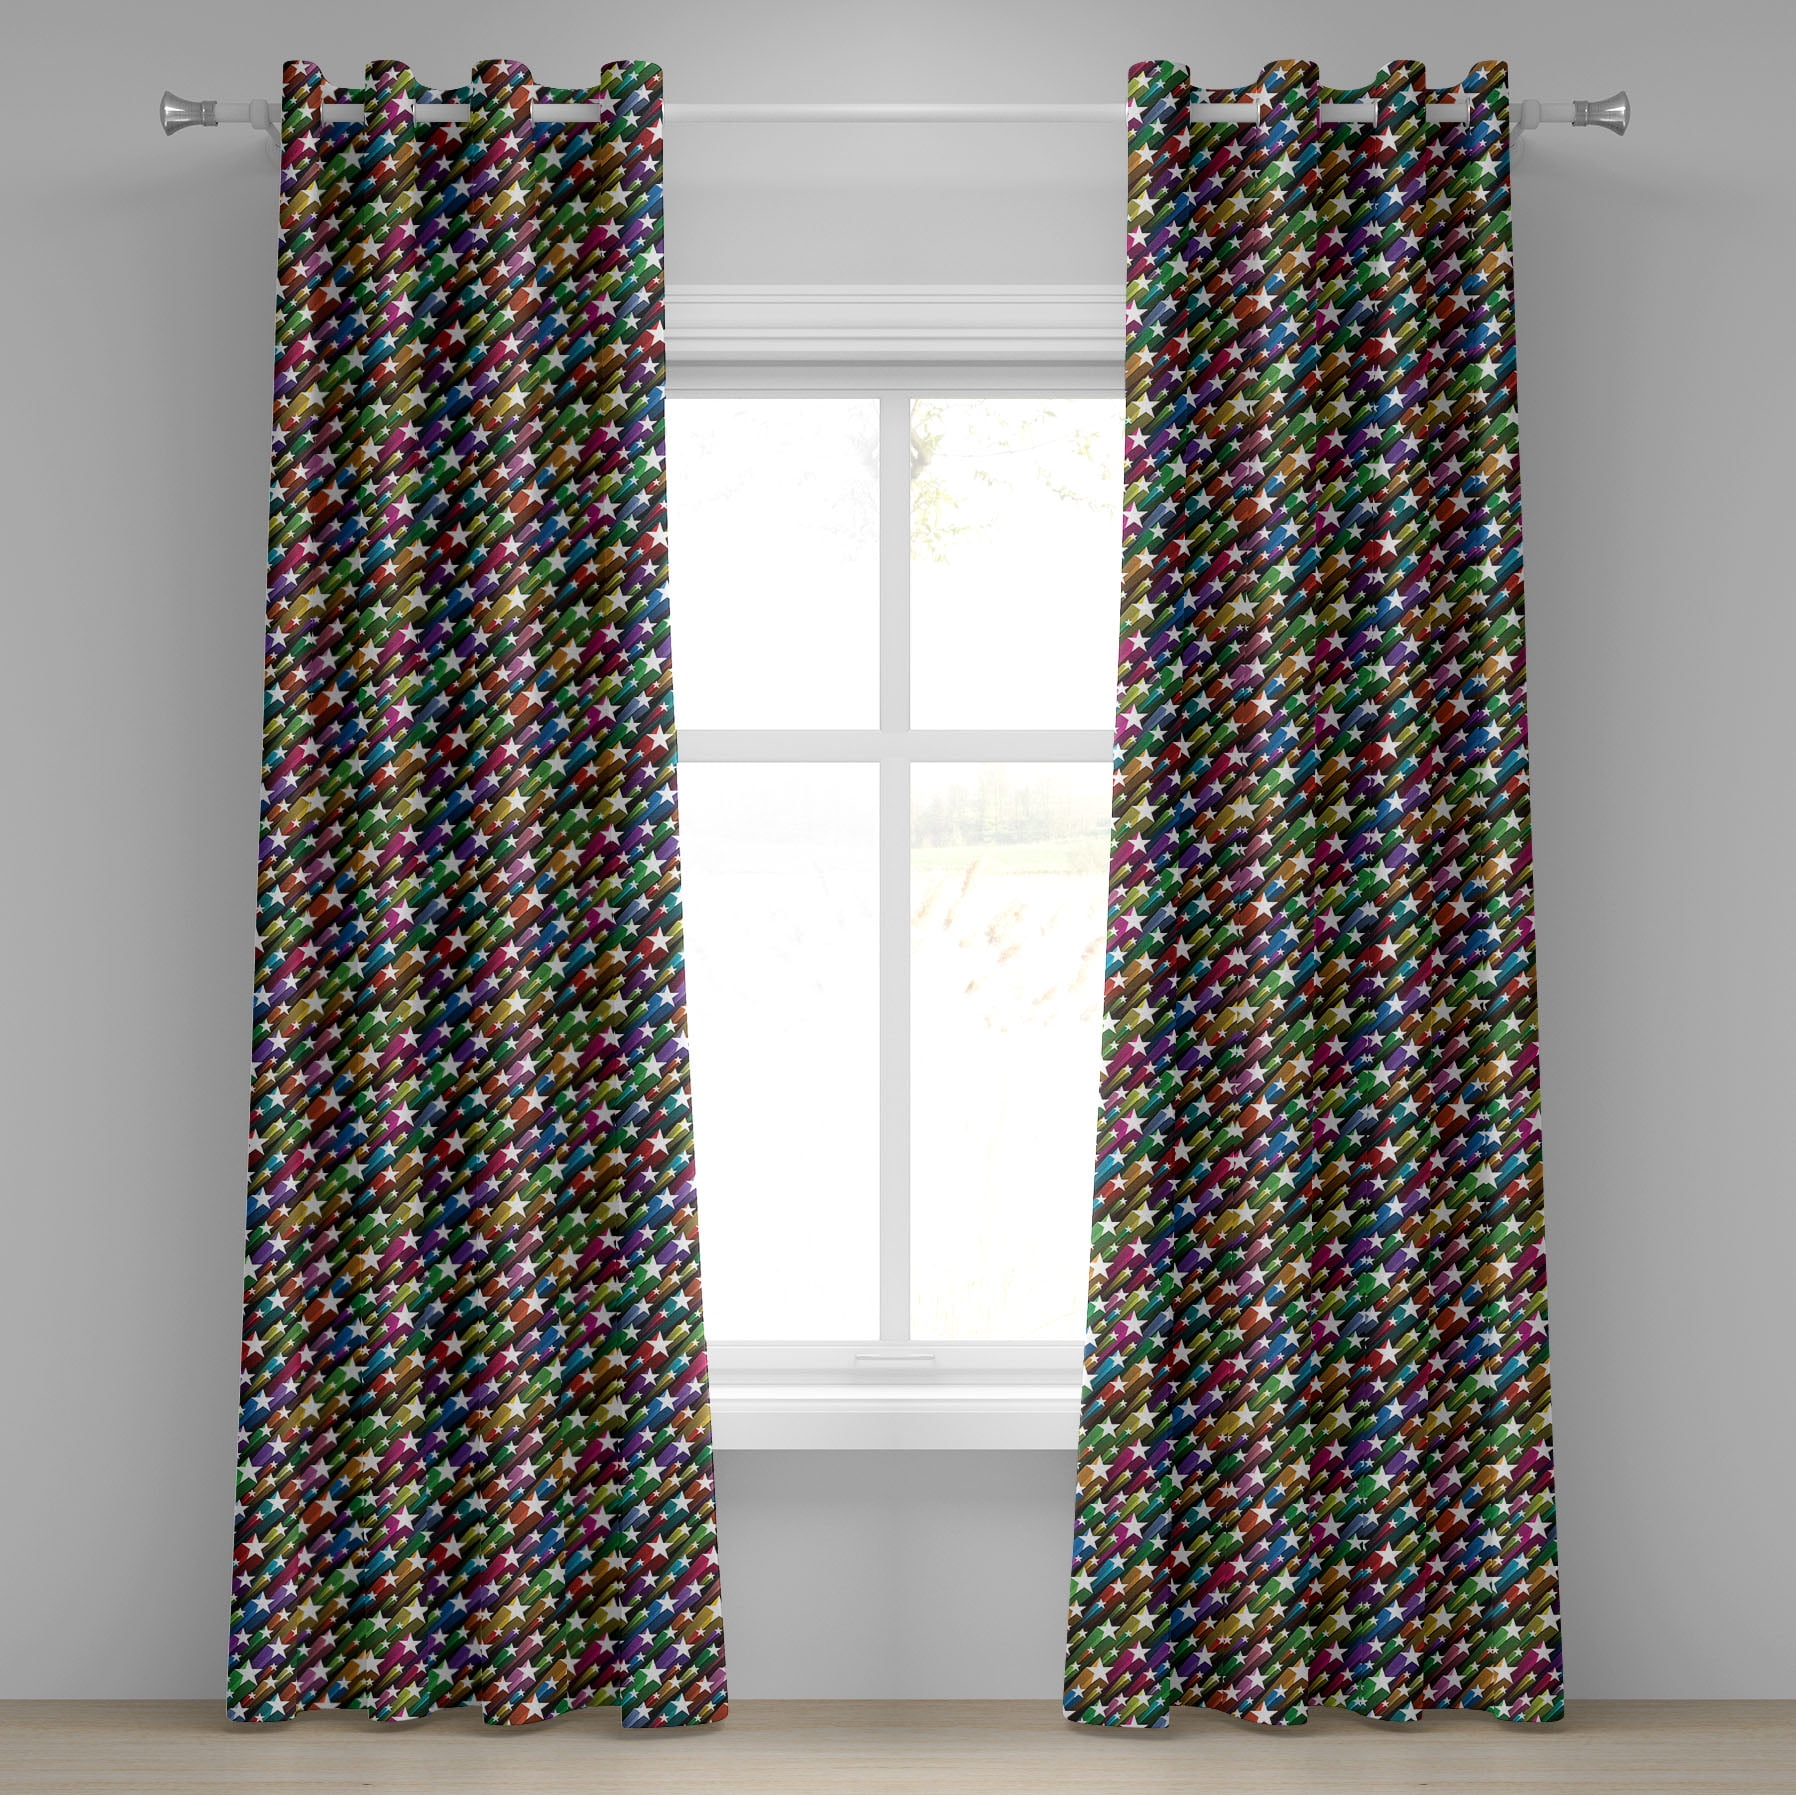 Colorful Mermaid Scale Window Curtains Decorative Curtain Panels 50% Blackout 